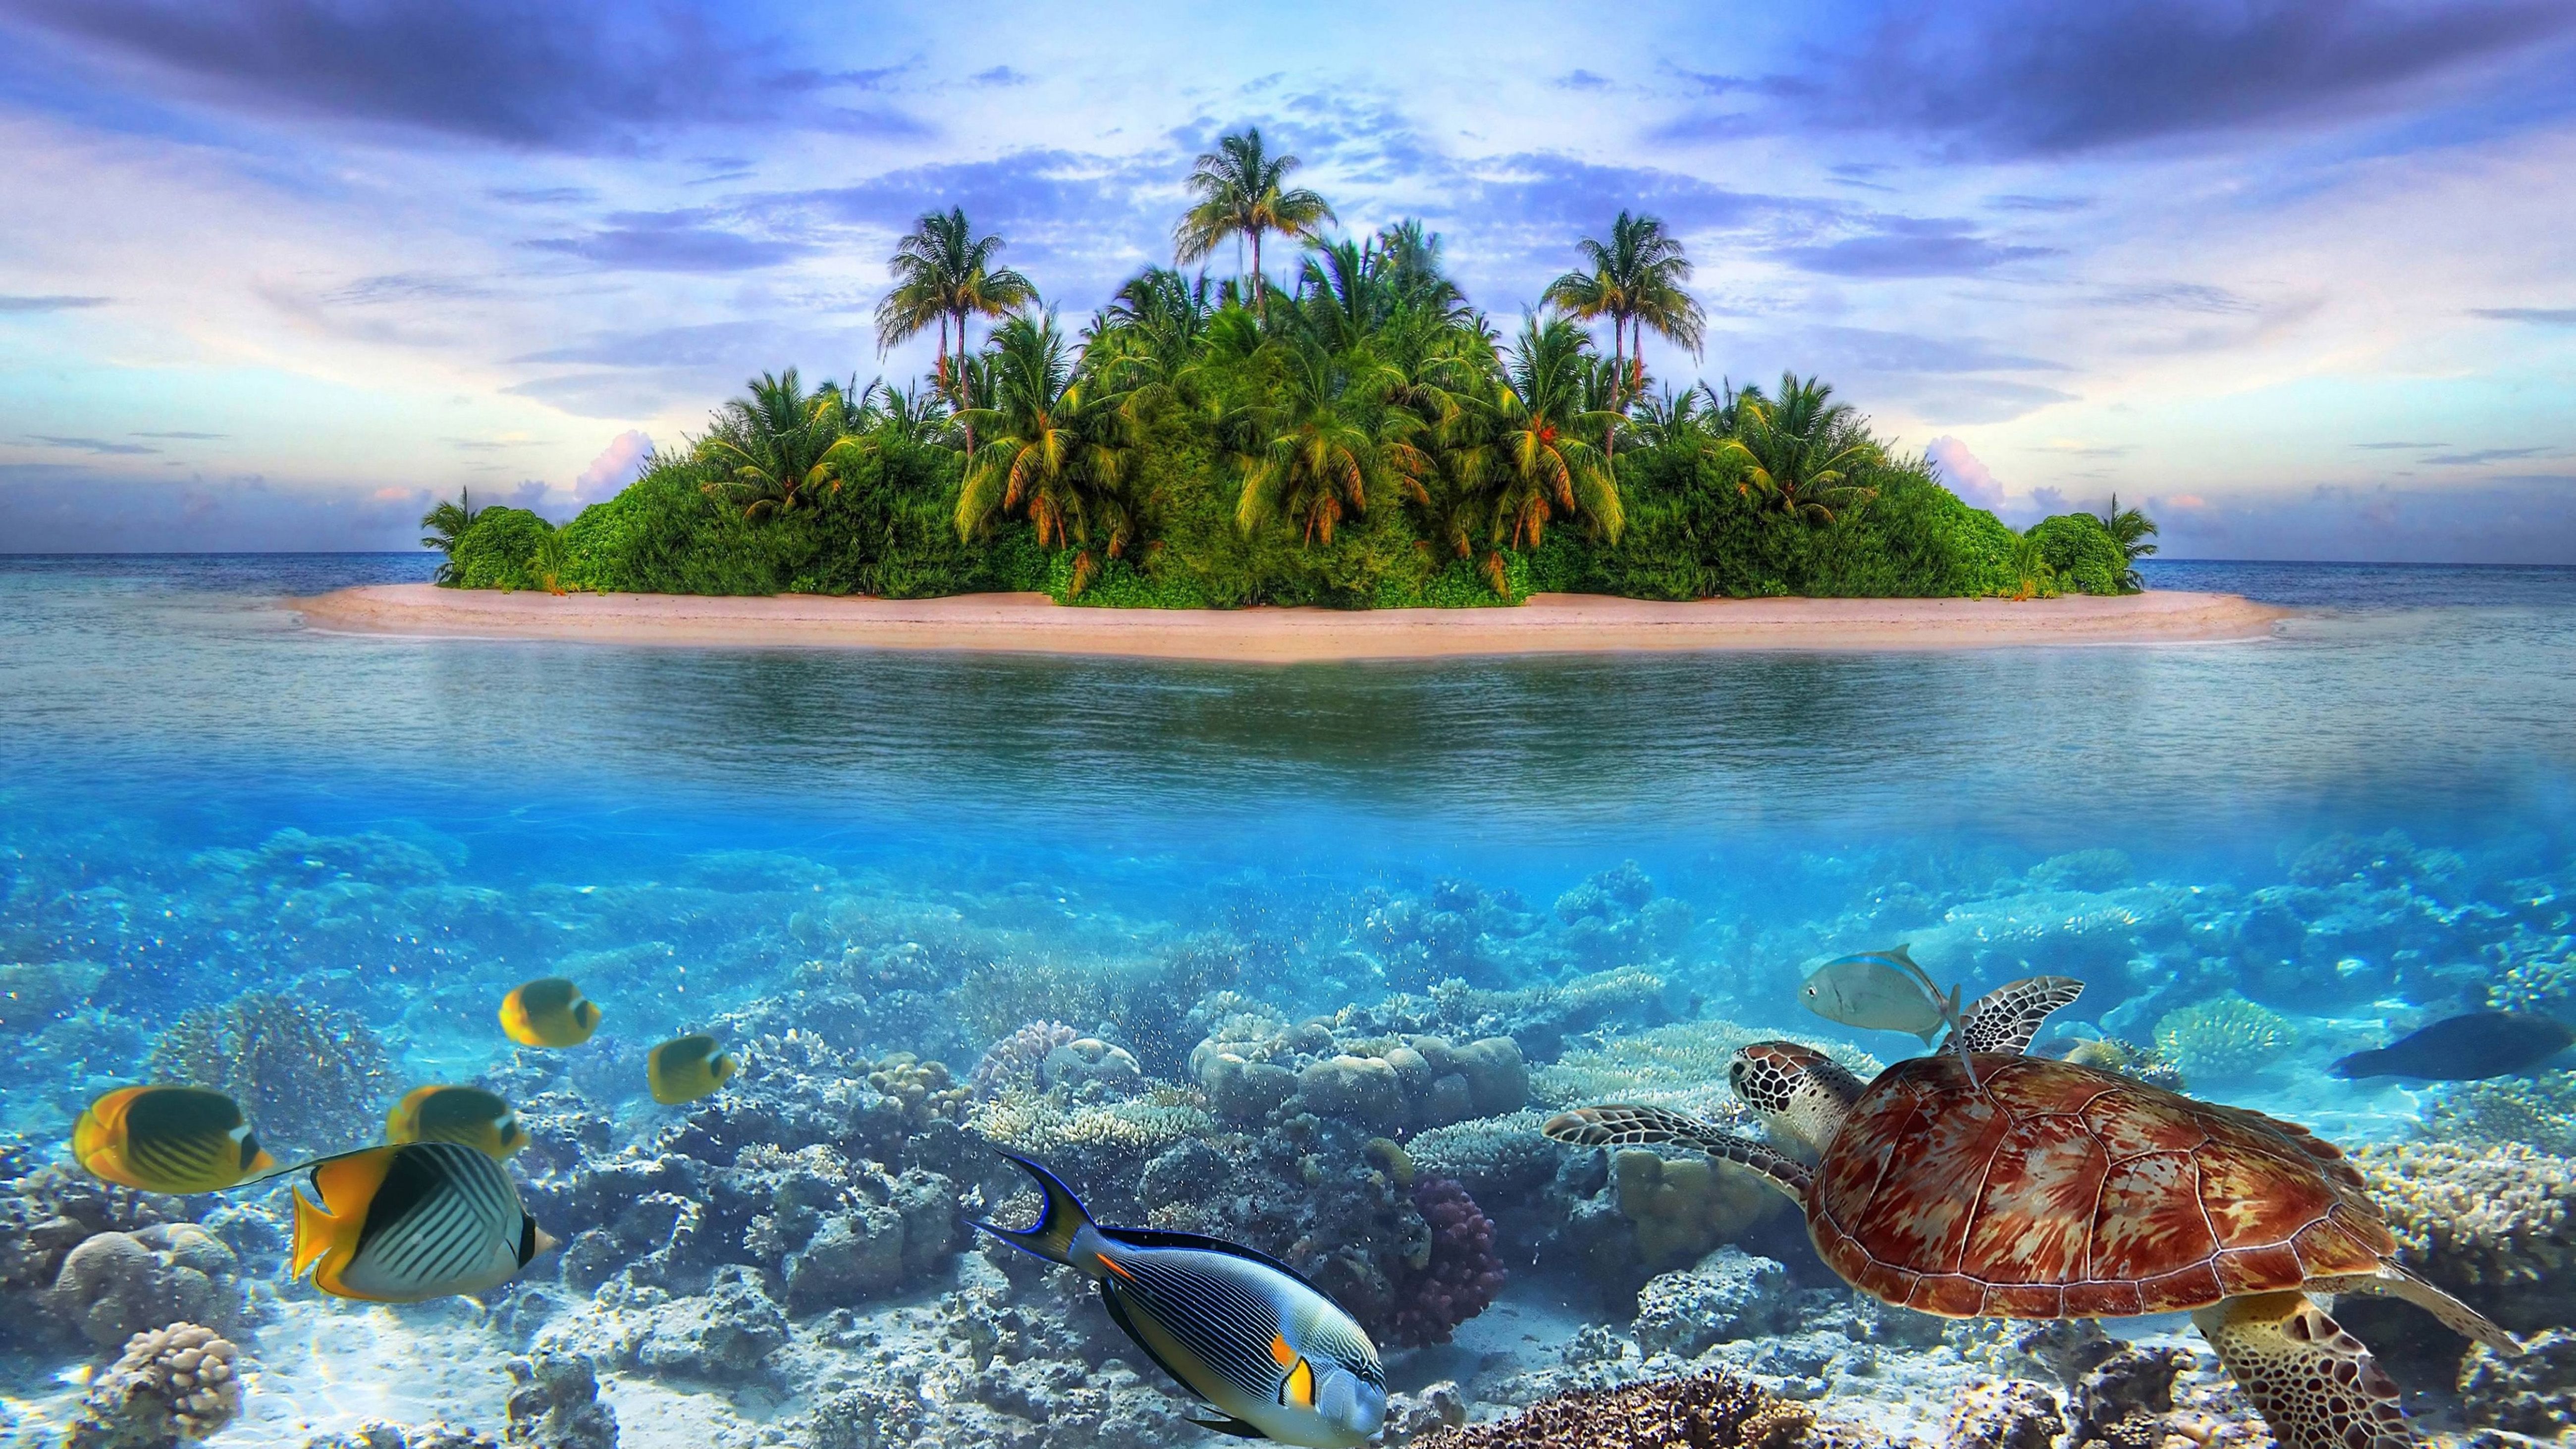 Tropical Island Maldives Palm Trees Sandy Beach Underwater World Turtle Fishes Corals Ultra HD Wallpaper For Desktop Mobile Phones Tablet And Tv 5200x2925, Wallpaper13.com